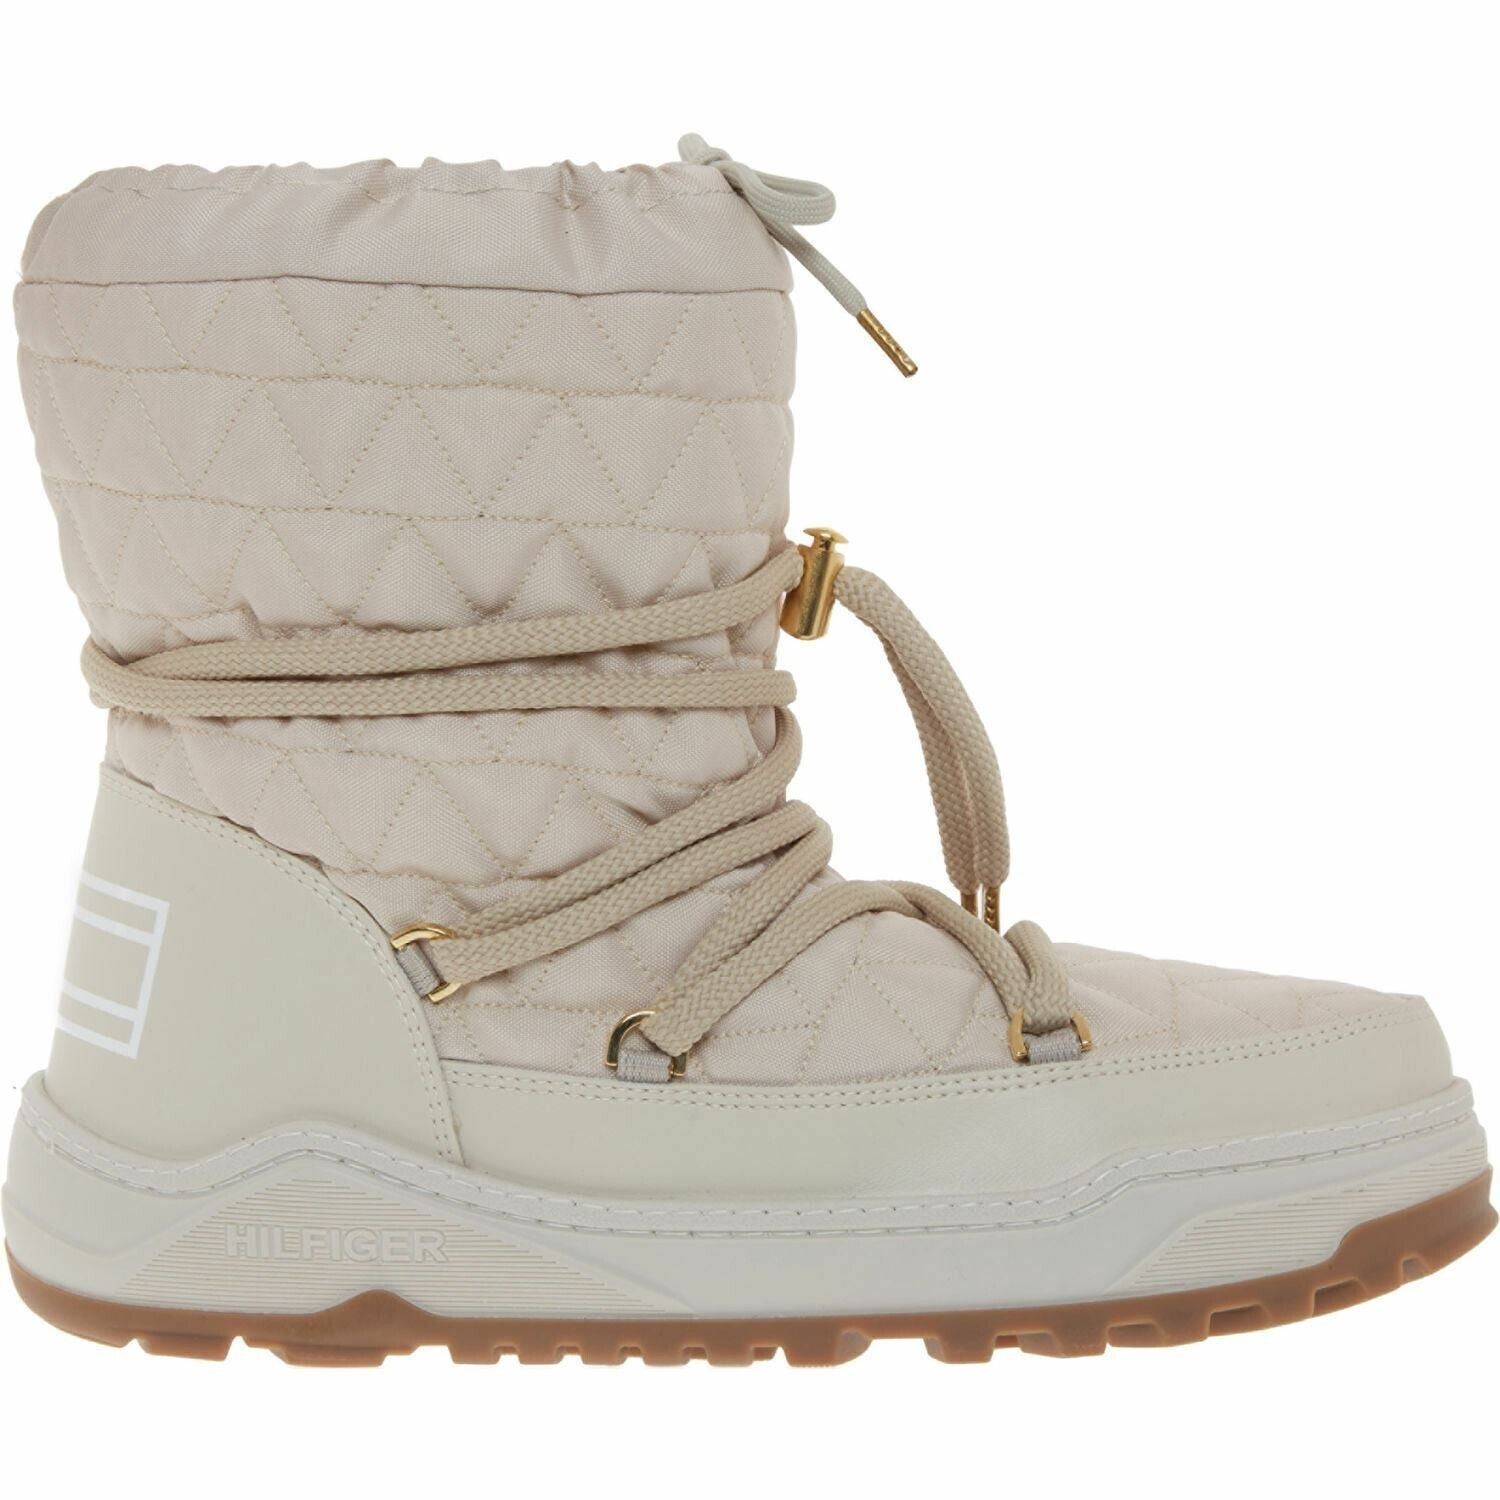 TOMMY HILFIGER Womens Quilted & Fleece Lined Snow Boots, size UK 6 /EU 39